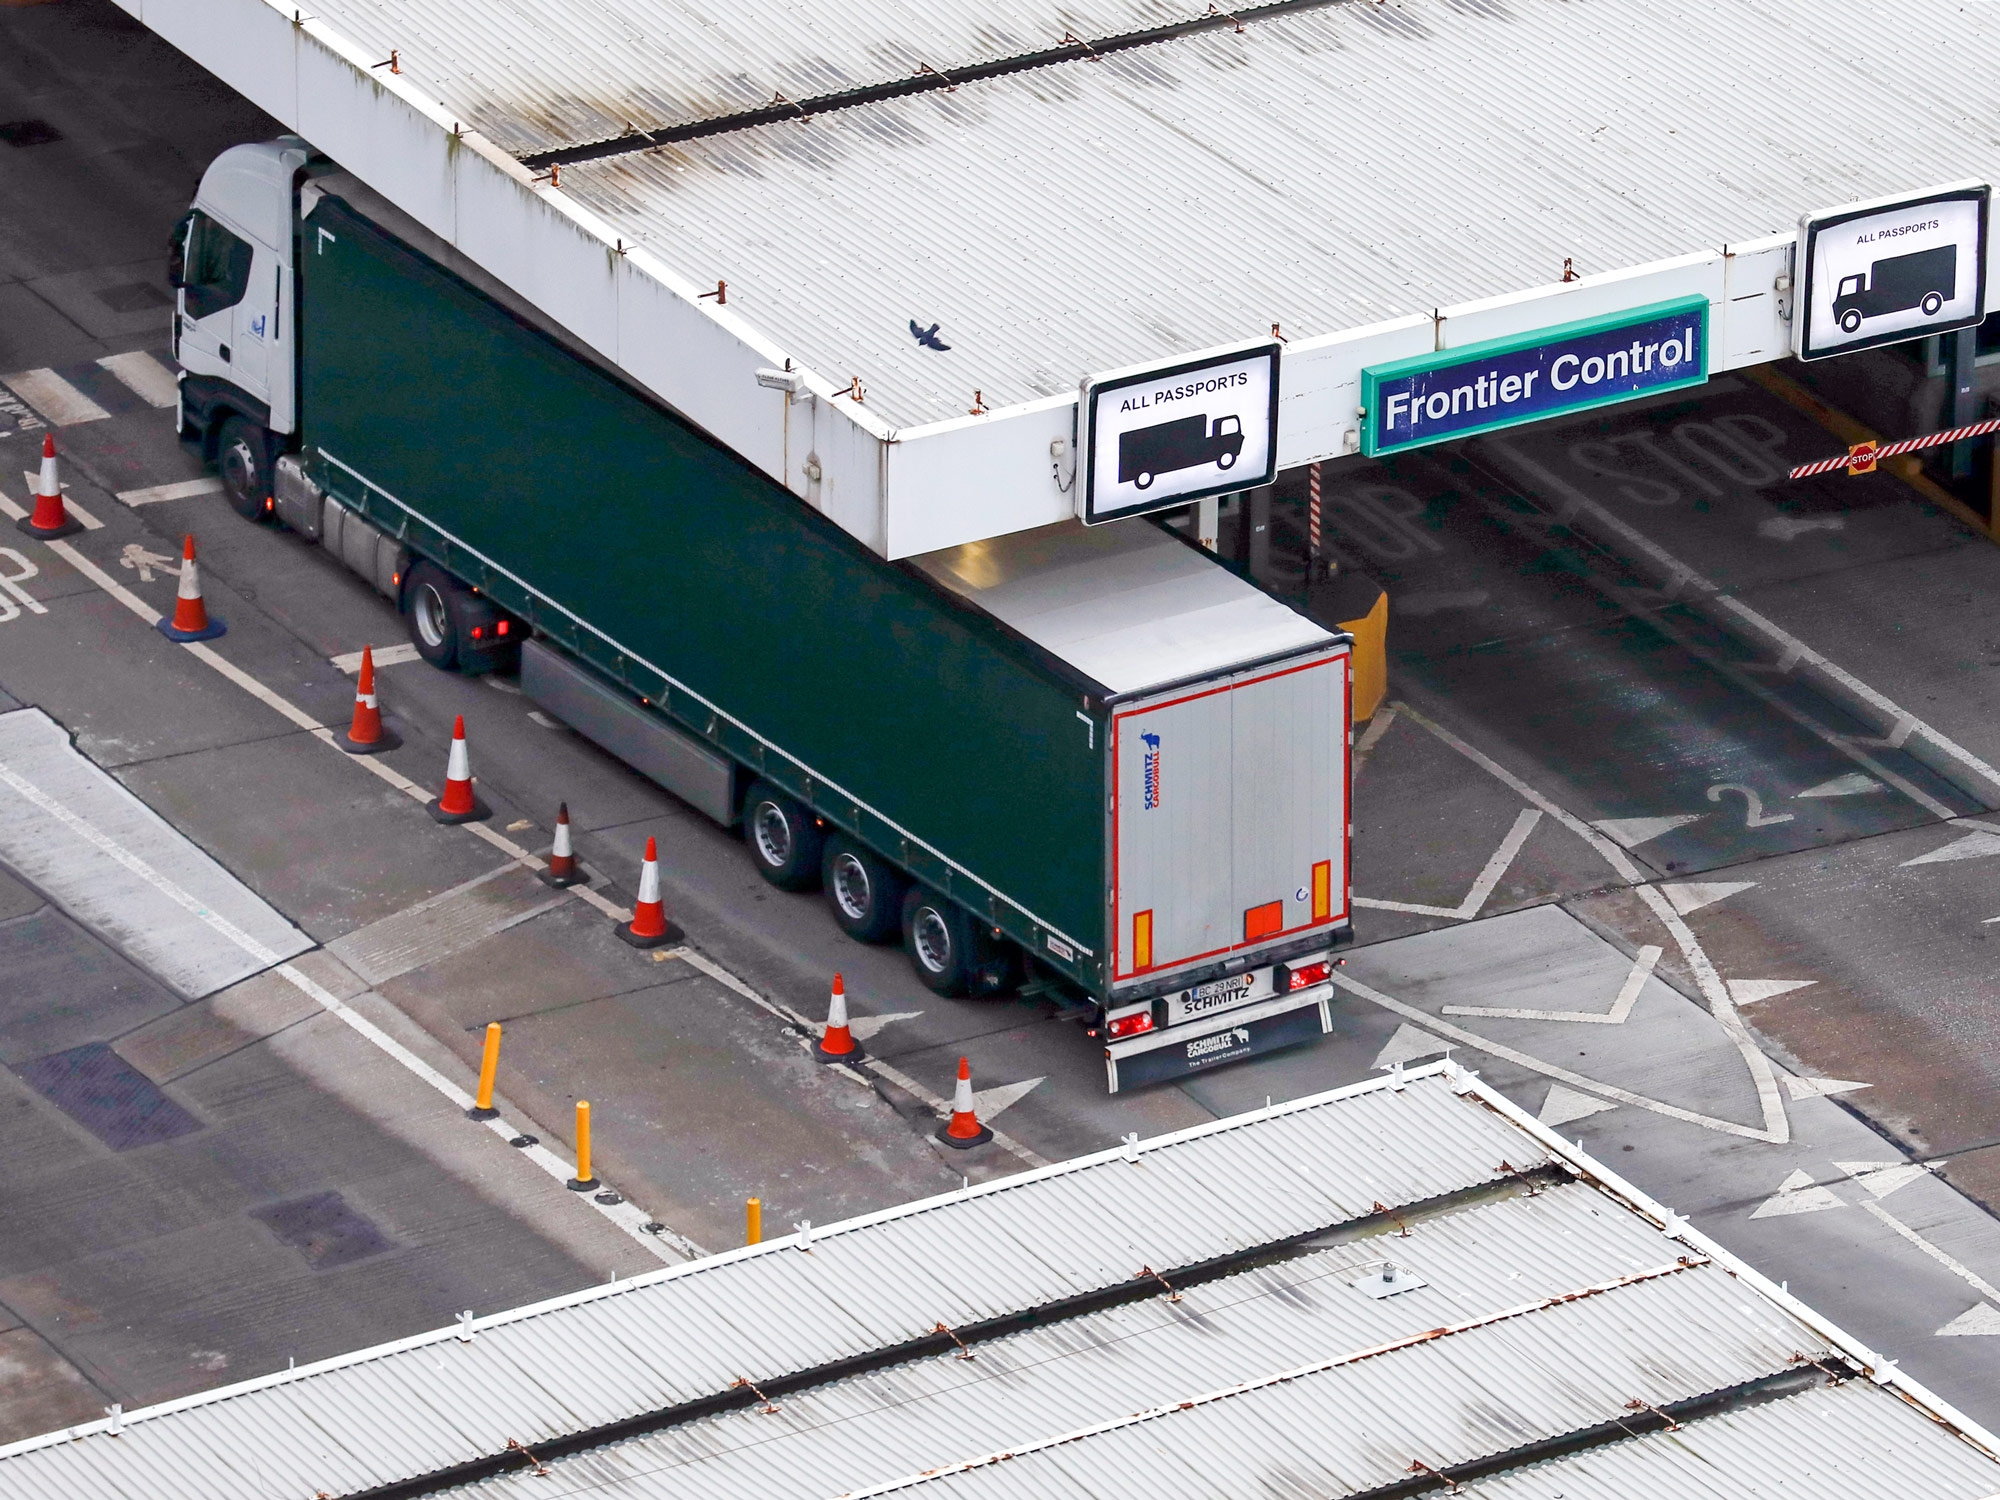 A truck enters a border control post at the Port of Dover Ltd. in Dover, U.K.